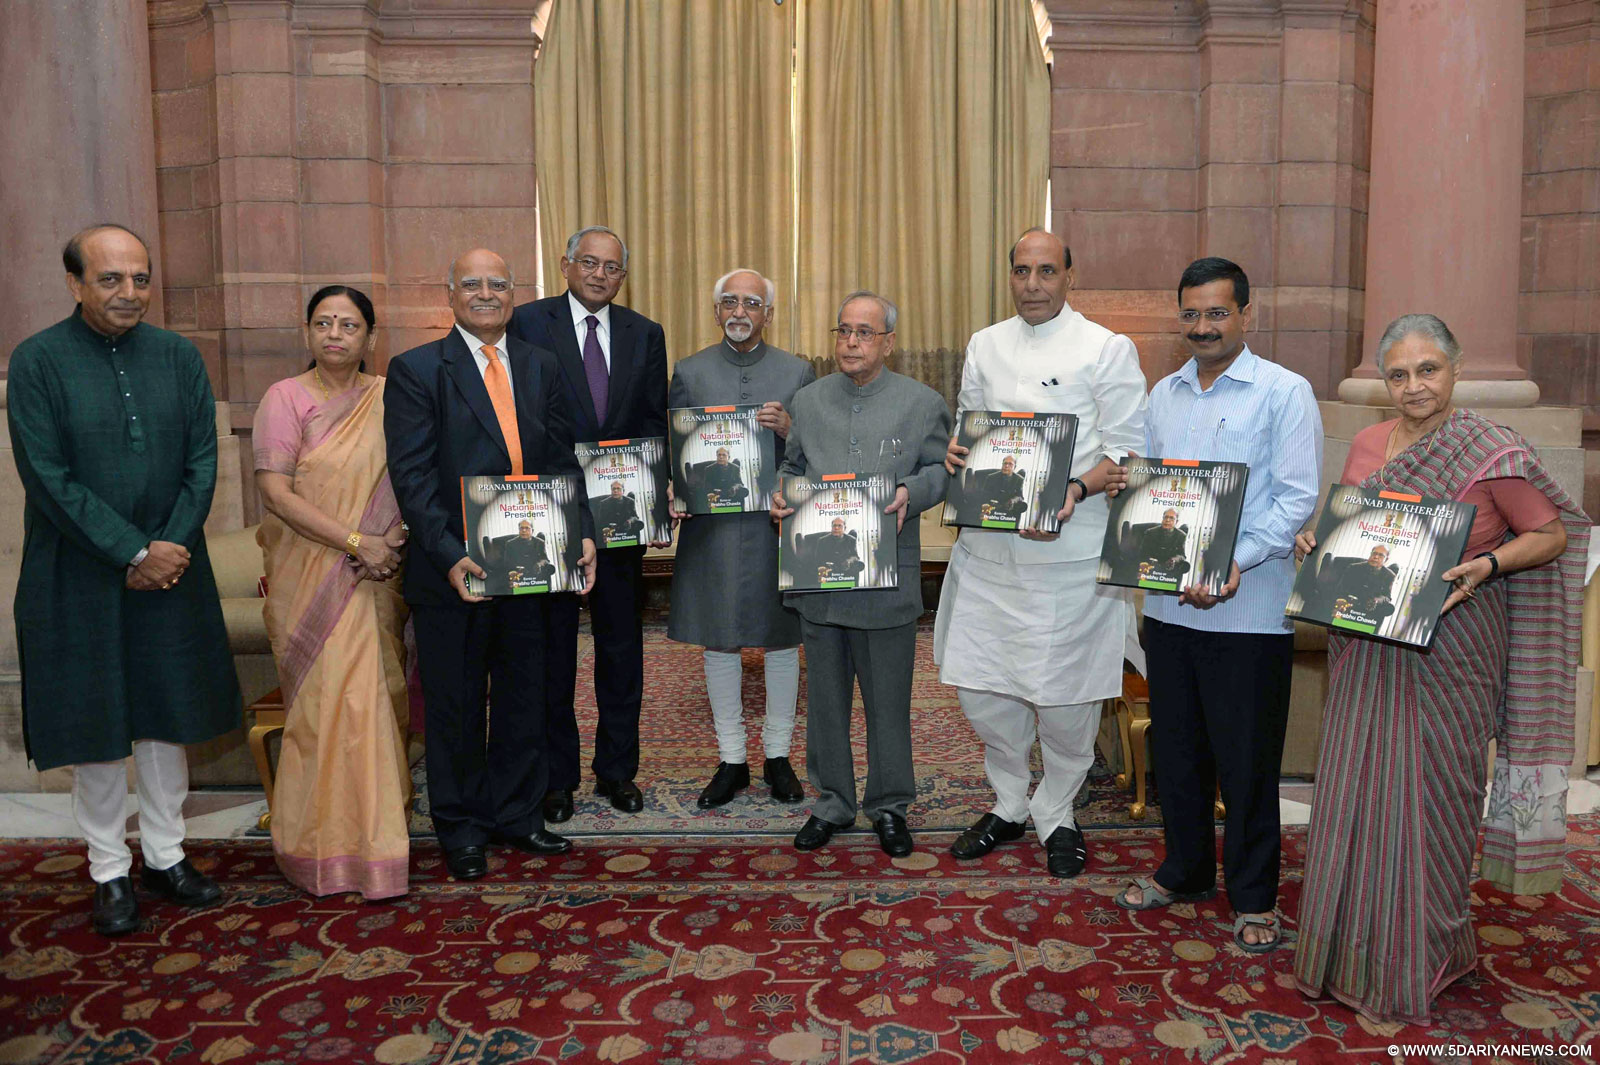 President Pranab Mukherjee with Vice-President Mohammad Hamid Ansari, Union Home Minister Rajnath Singh, Delhi chief Minister Arvind Kejriwal, Former Kerala Governor Sheila Dikshit, journalist Prabhu Chawla, and other dignitaries during a programme organised to receive the first copy of Chawla